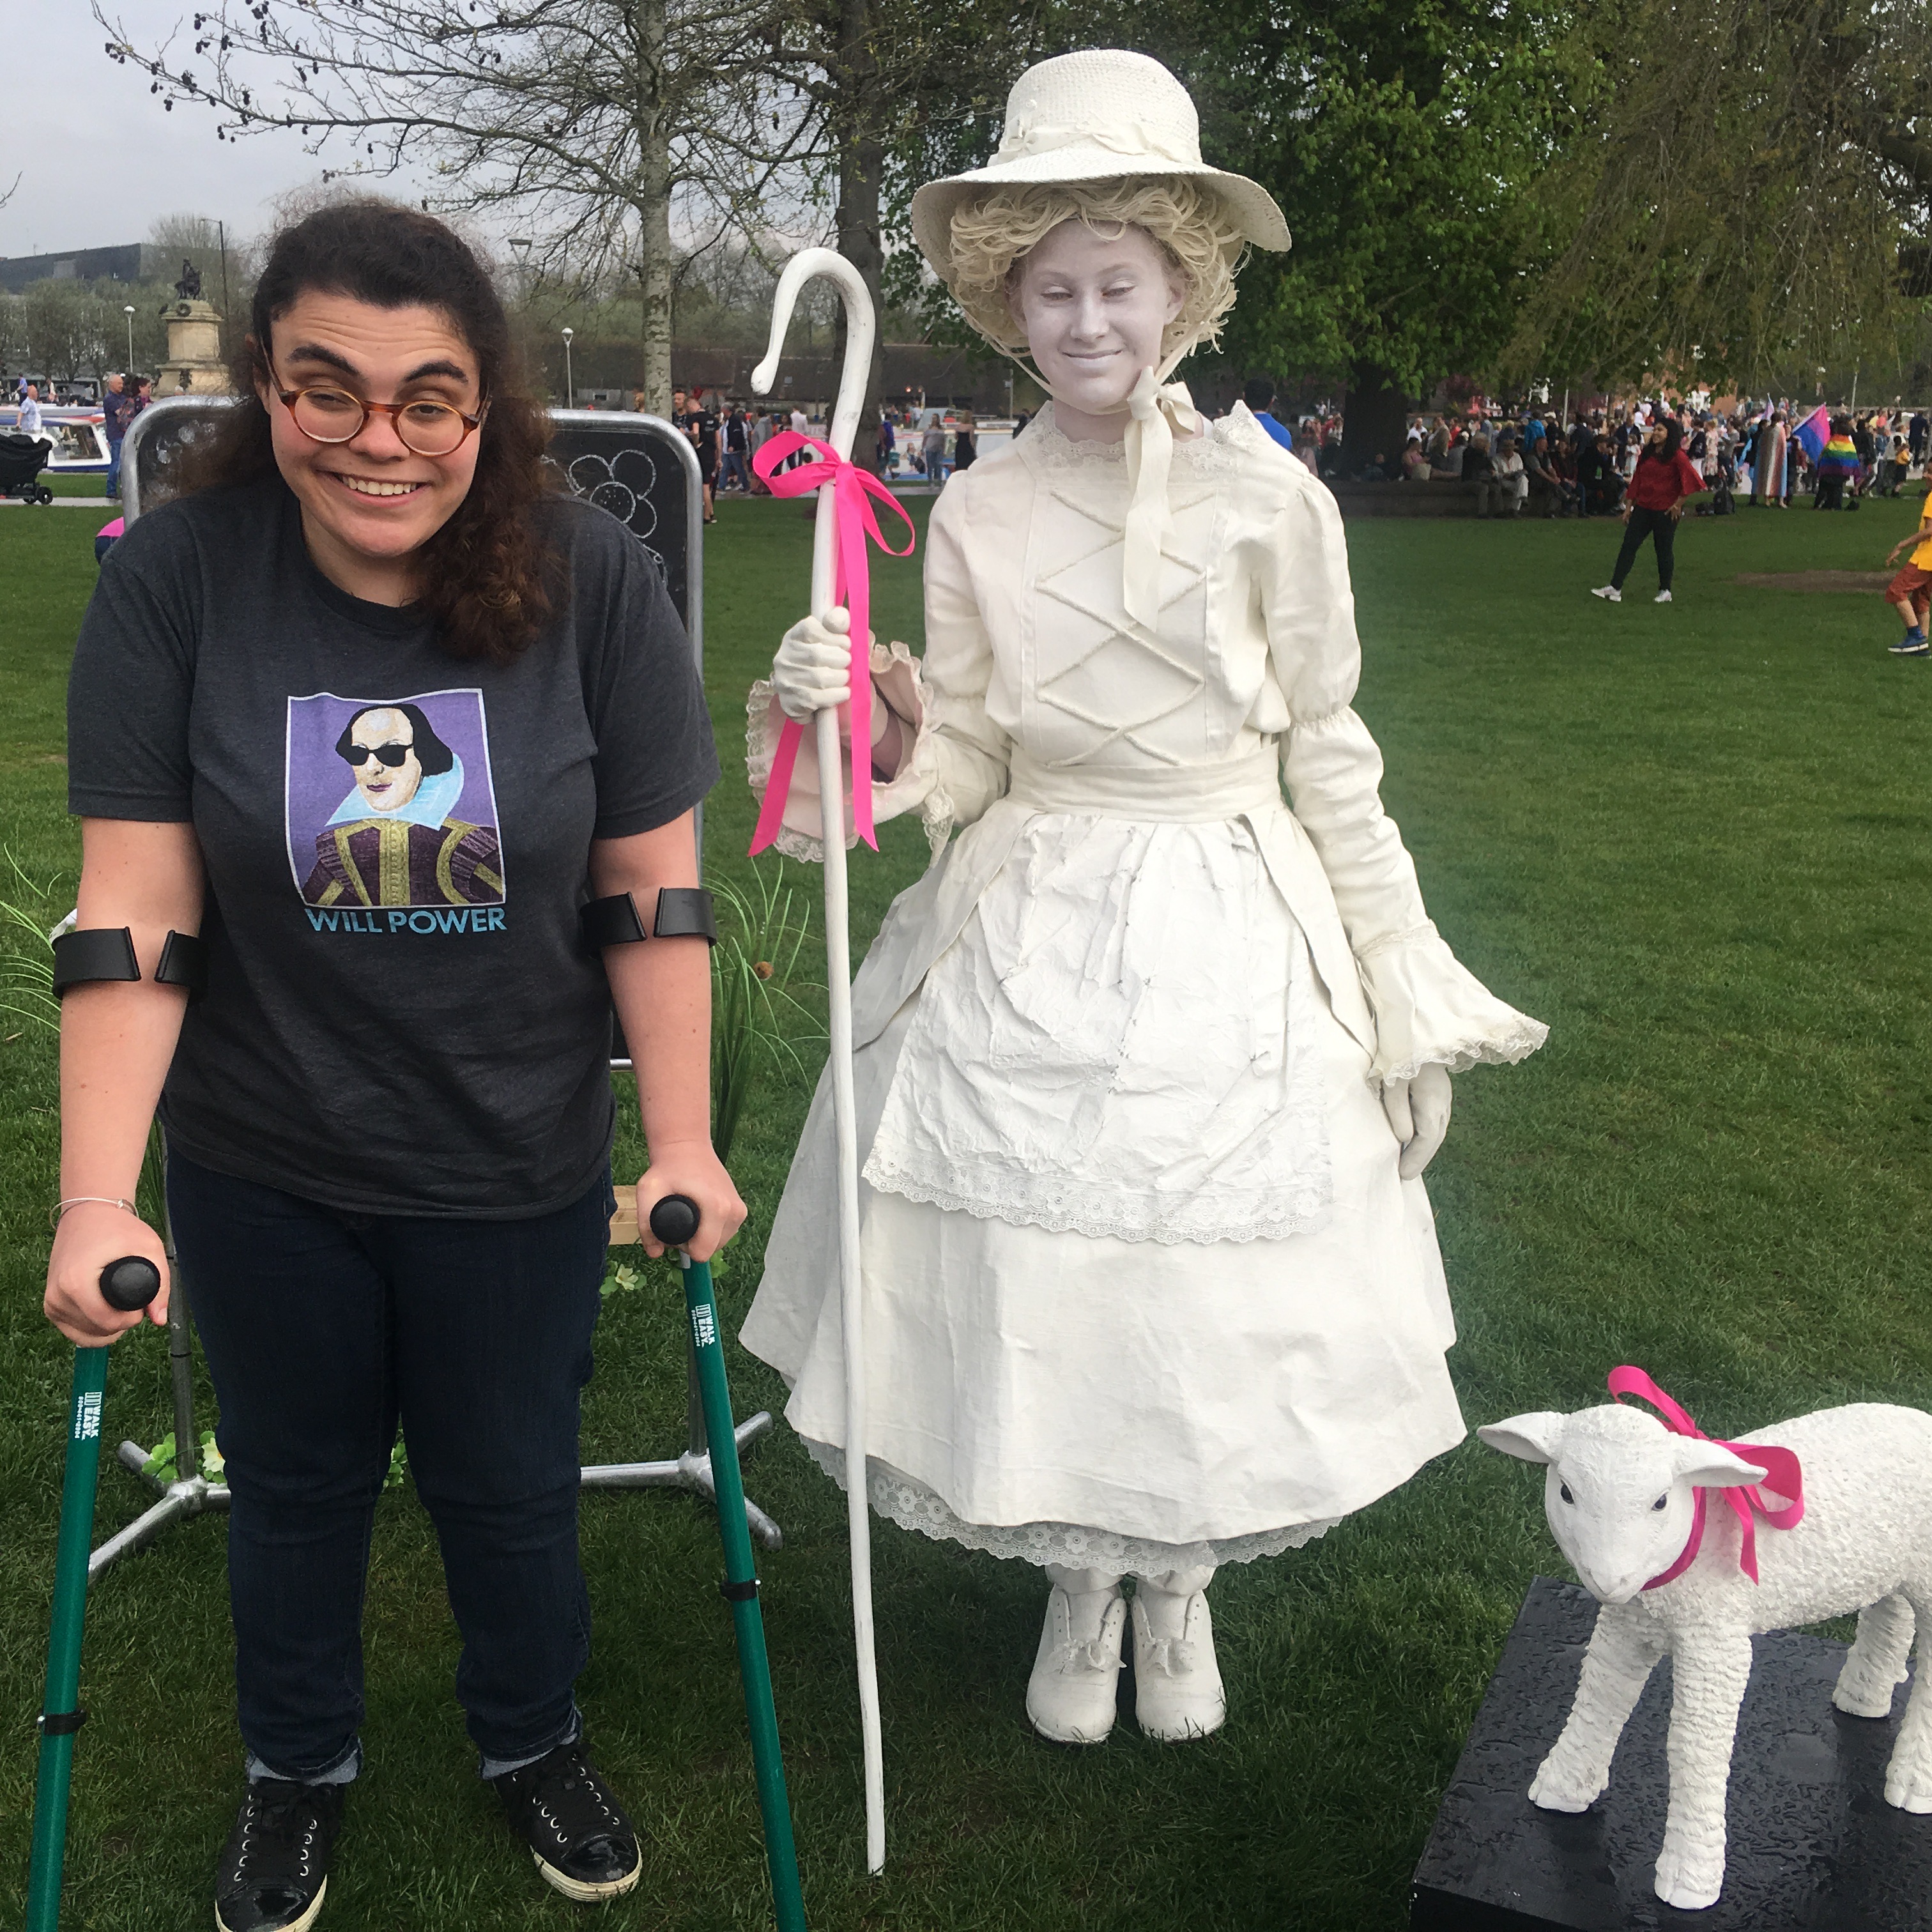 alt="This Little Bo Peep costume is so accurate! Living statues are one of the most unique aspects of Bancroft Gardens